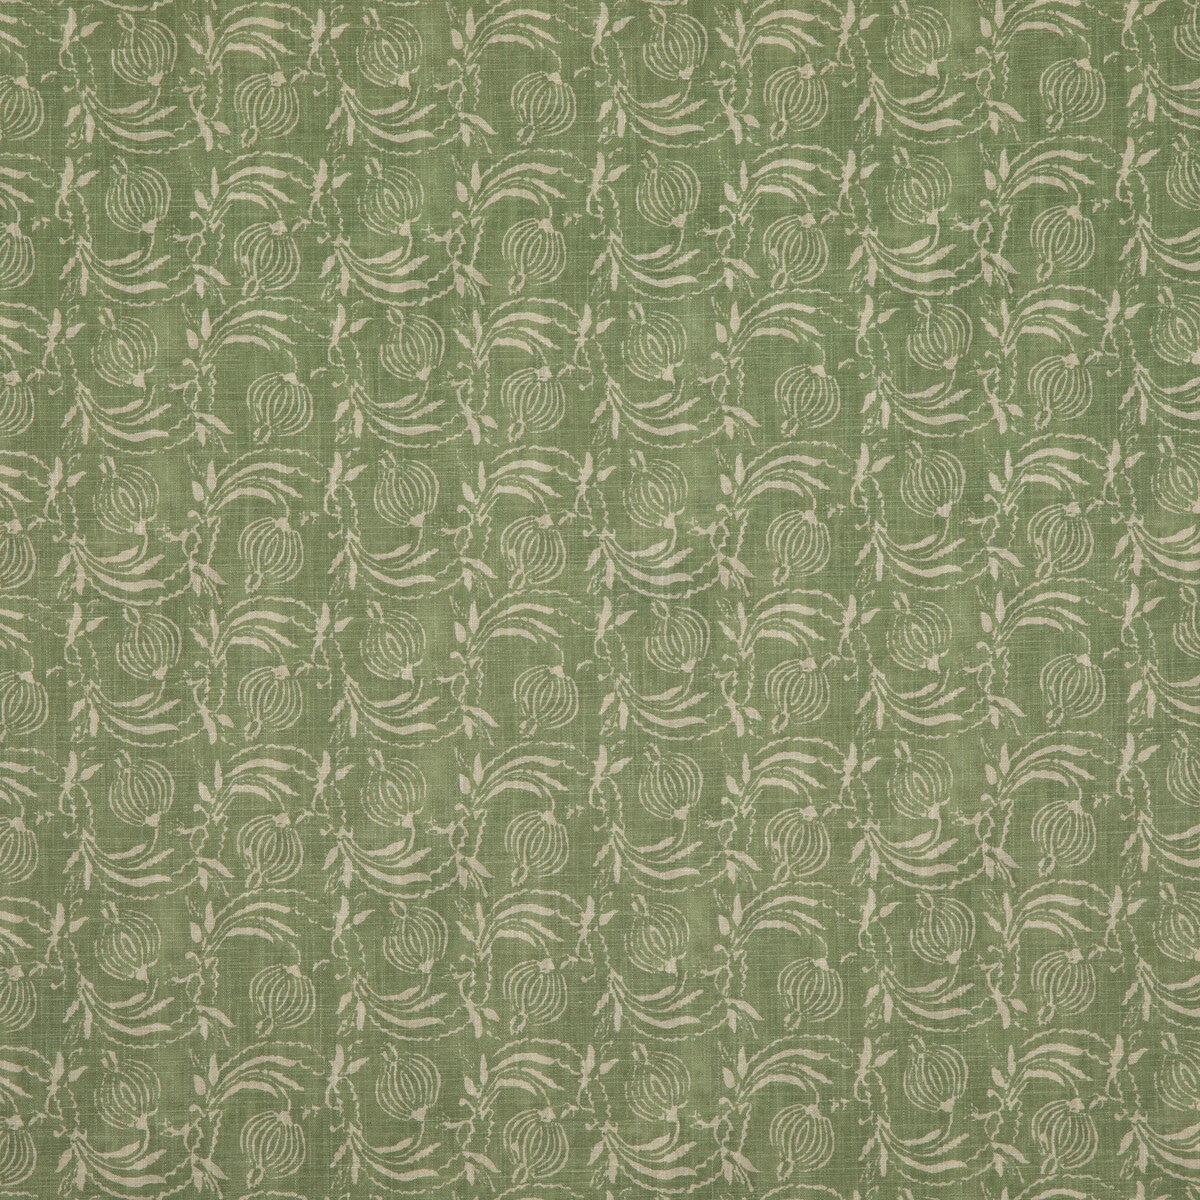 Pomegranate fabric in green color - pattern BP10825.3.0 - by G P &amp; J Baker in the Coromandel Small Prints collection